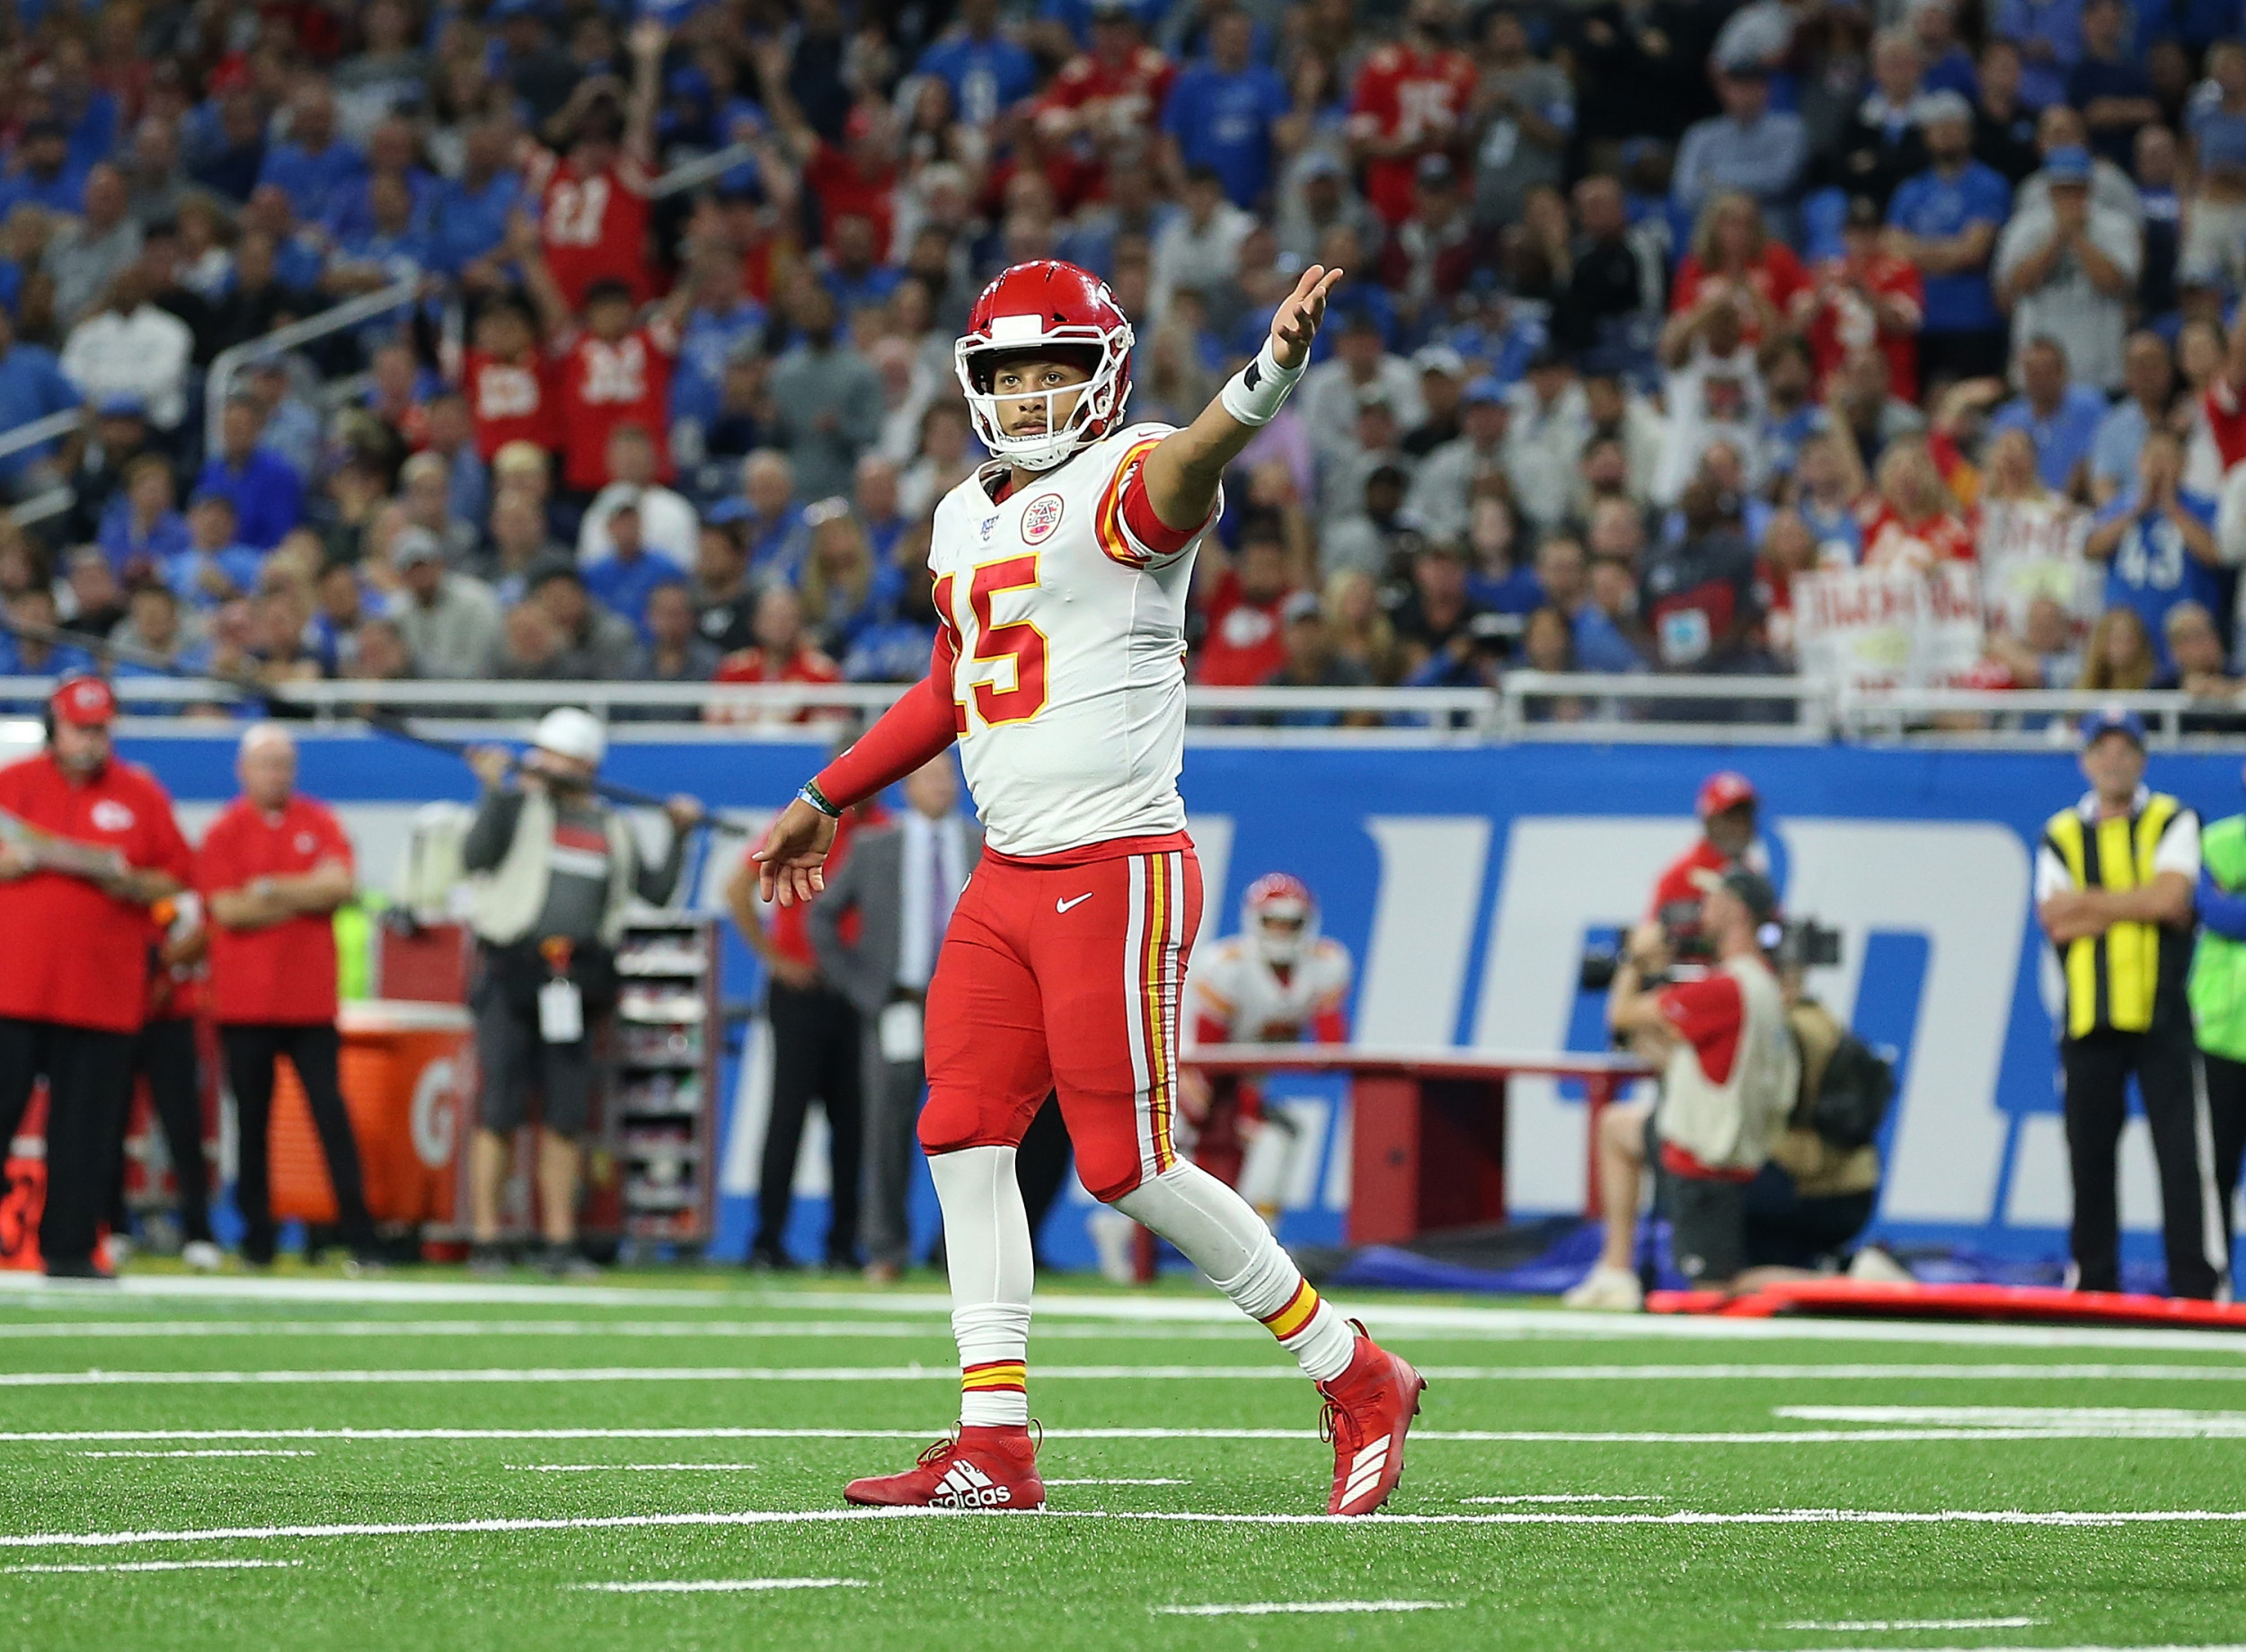 NFL Sunday Night Football: Where to Watch Indianapolis Colts vs. Kansas City Chiefs, TV Channel